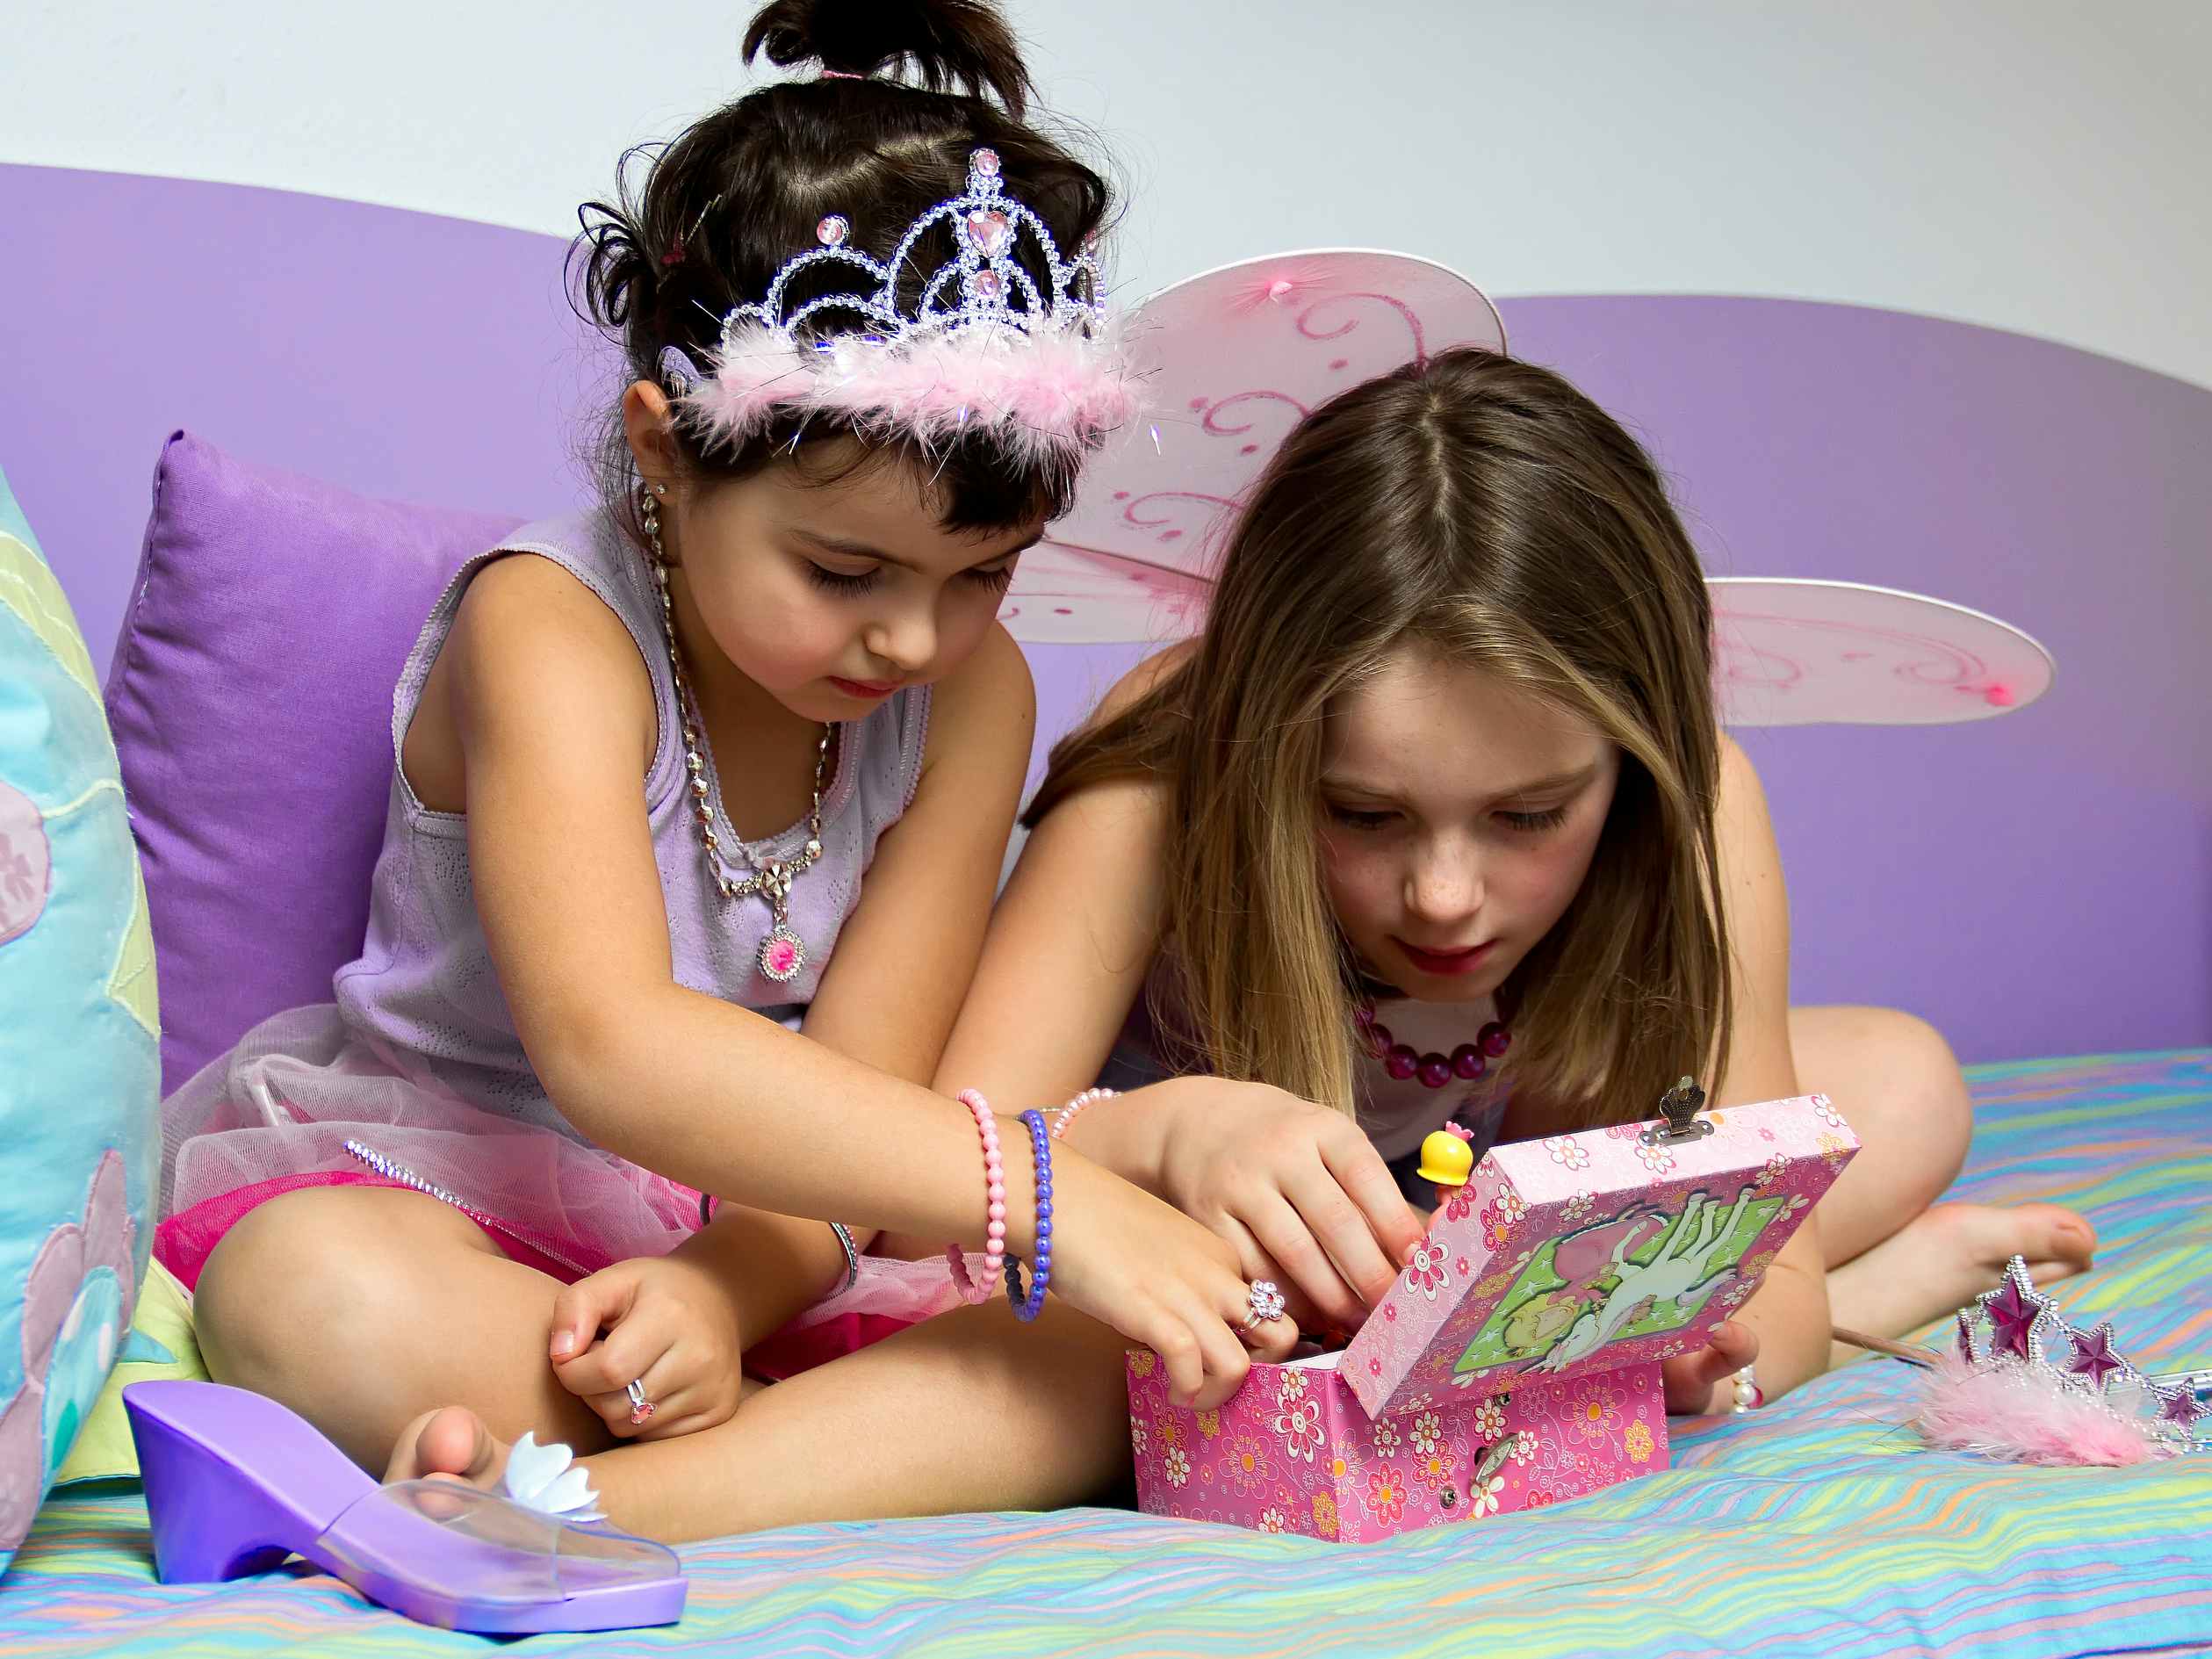 Two kids playing dress up with fairy princess costume pieces.